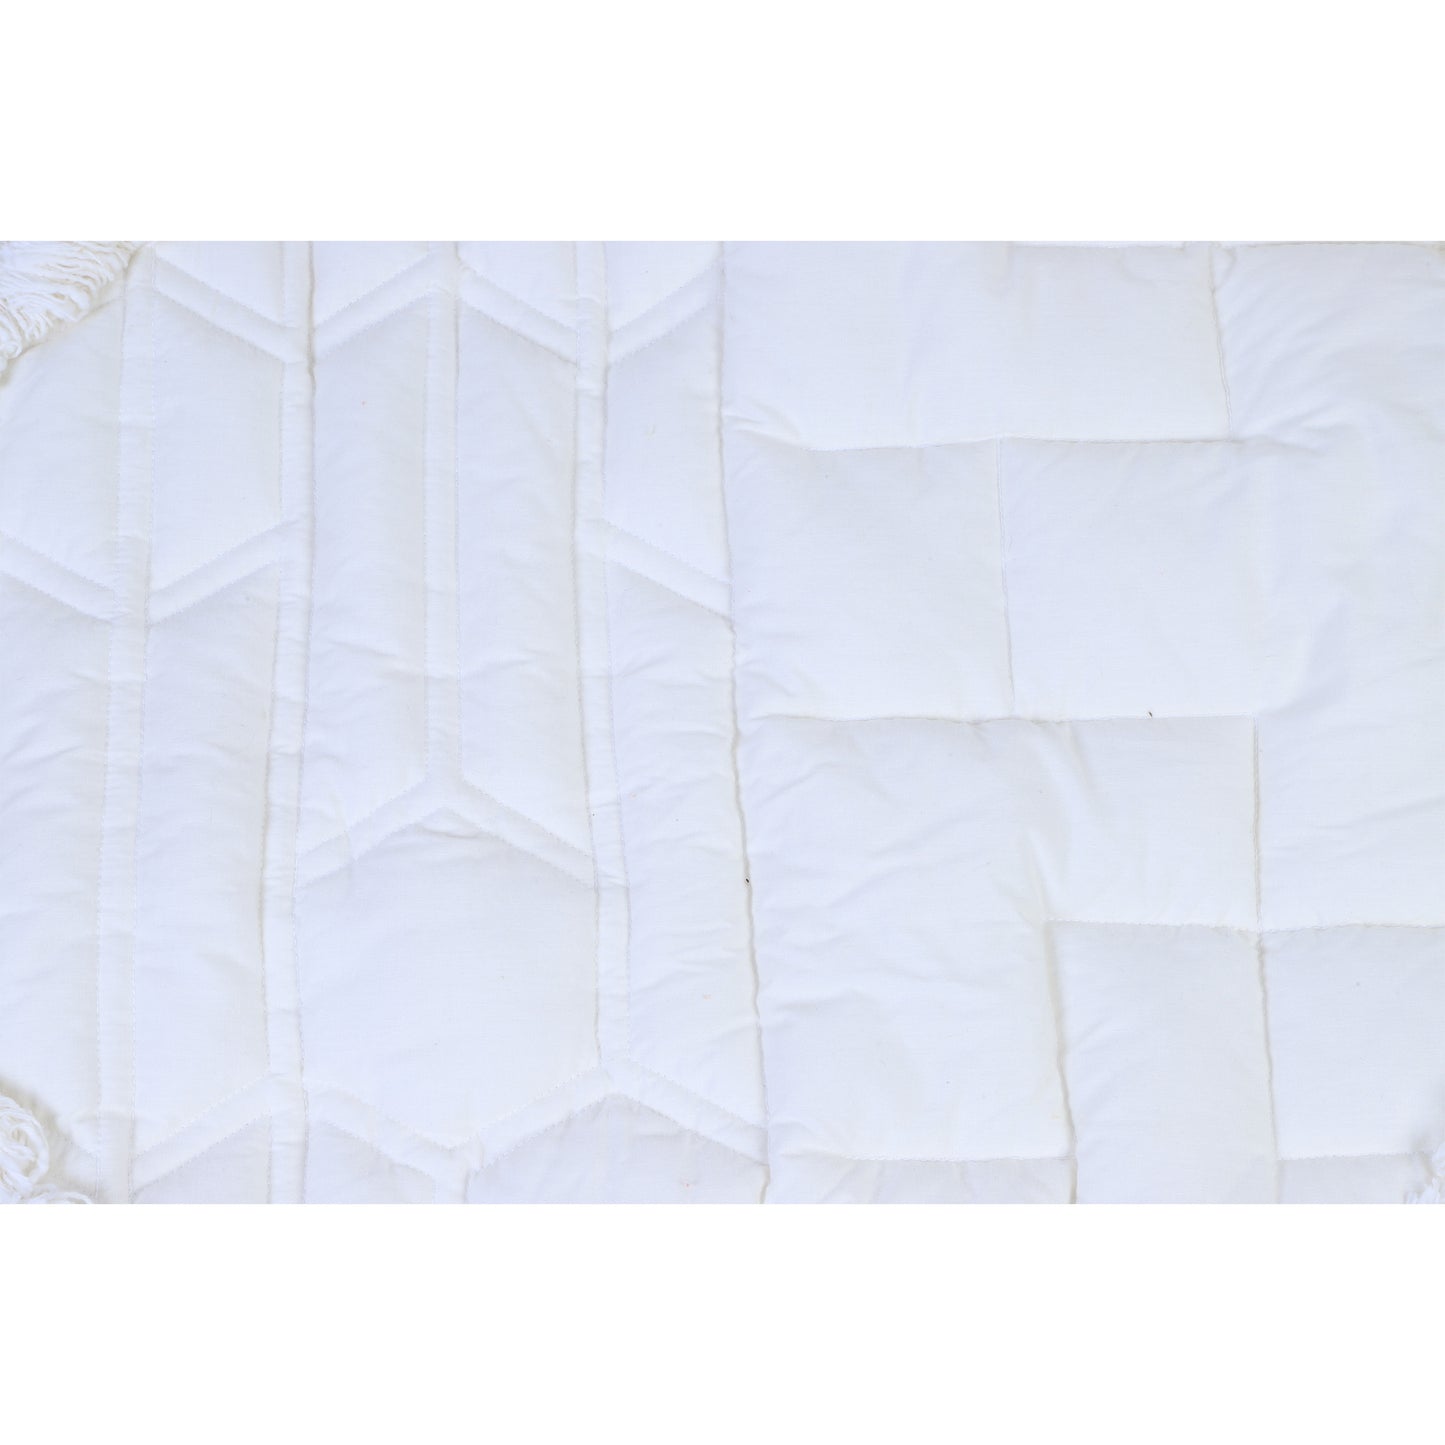 NUEVOS DOGGADIL Ivory Cotton Quilted Rectangle Pet Bed Mattress | Washable Padded Pet Bed| Light Weighted Dog Mat